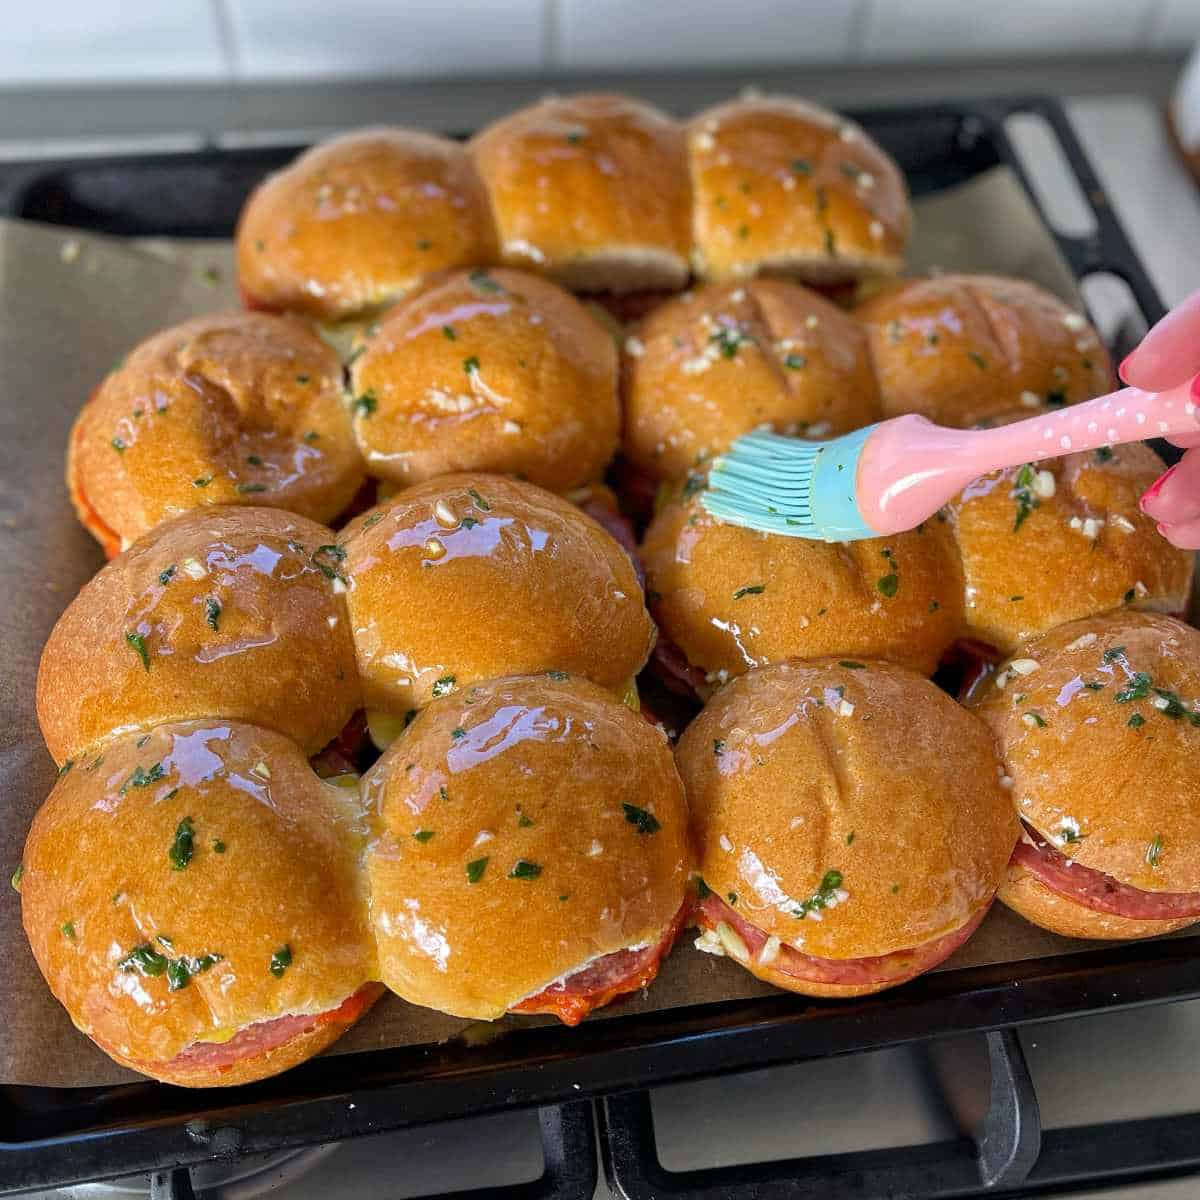 Assembled pepperoni sliders with a butter herb and garlic mix on top on a lined oven tray